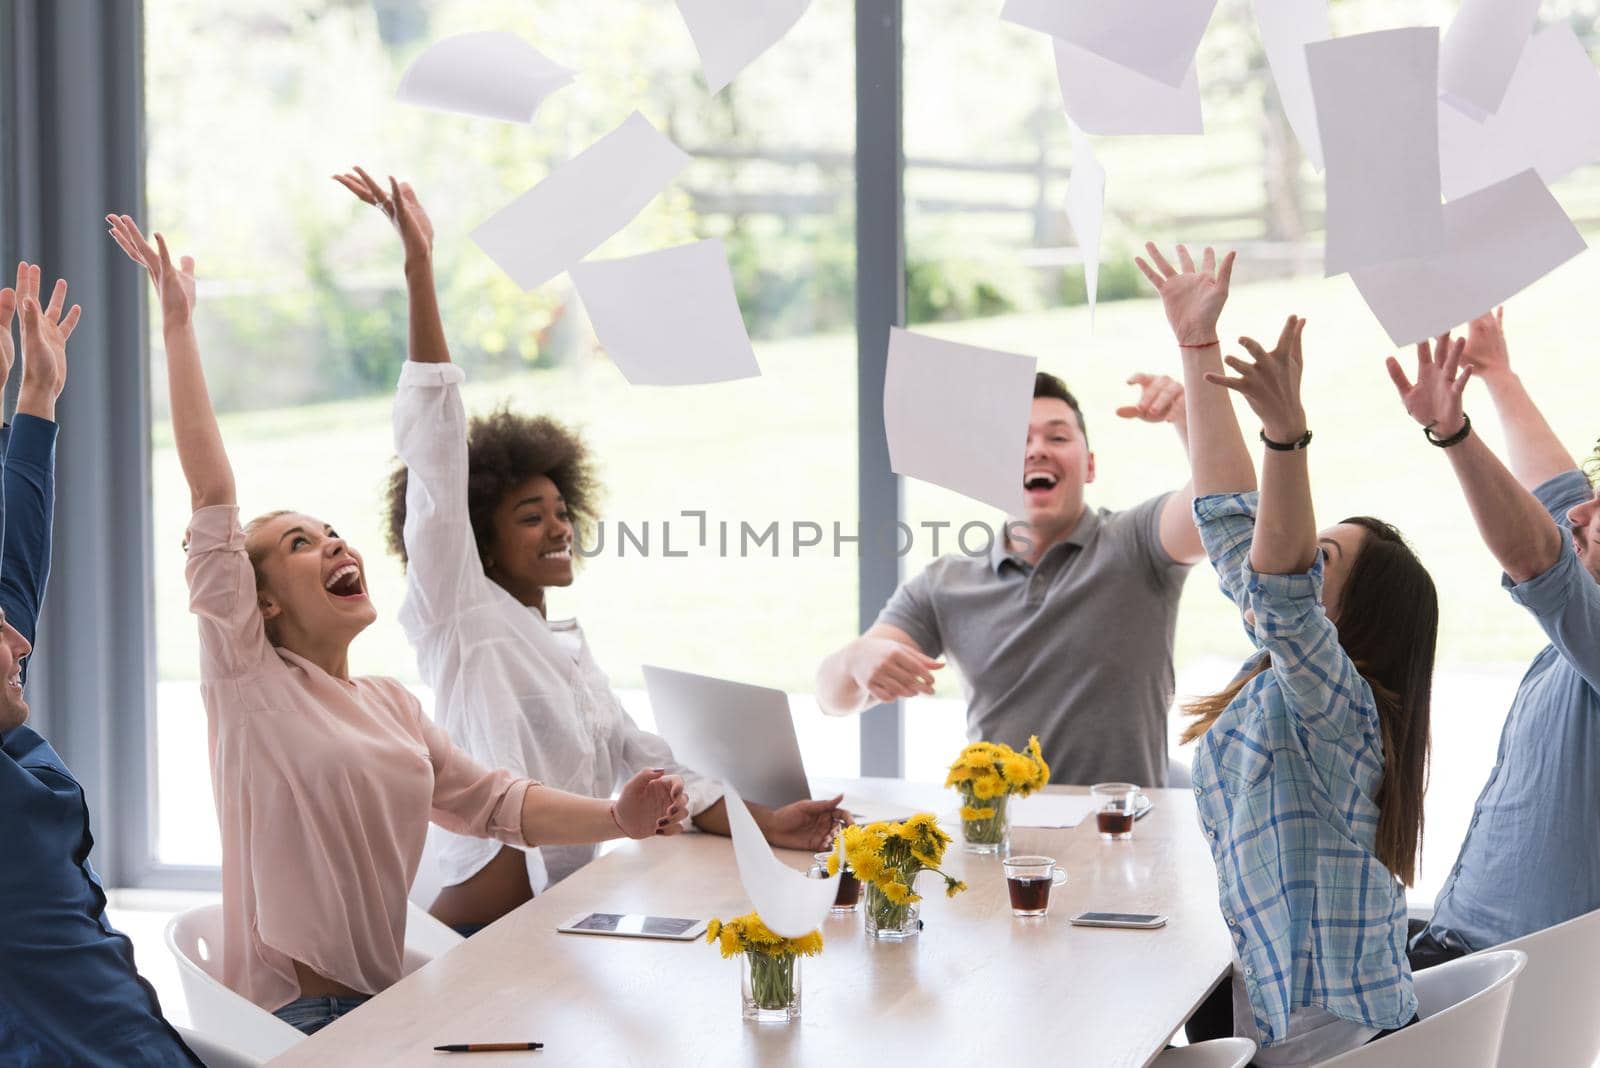 multiethnic Group of young business people throwing documents and looking happy while celebrating success at their working places in startup office